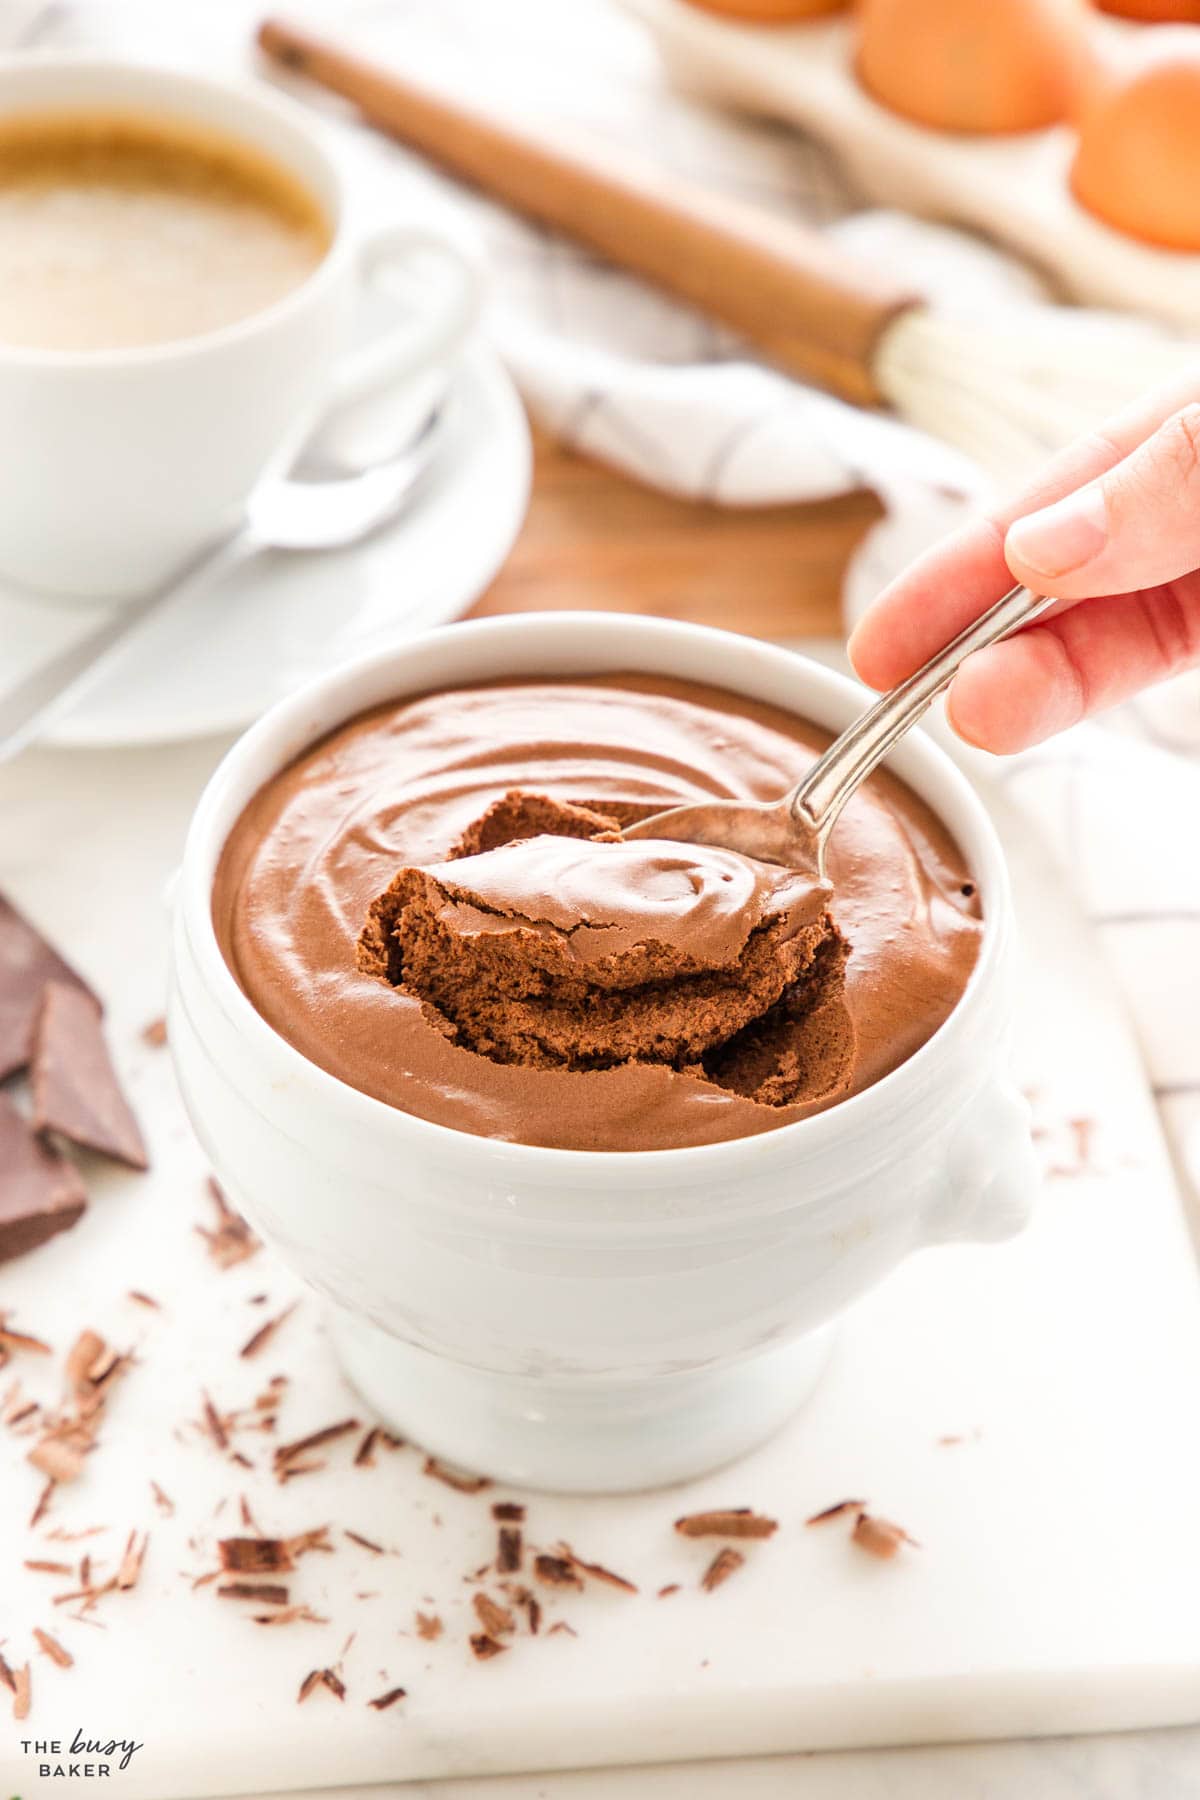 a hand making a spoonful of chocolate mousse with a vintage spoon (mousse au chocolat)